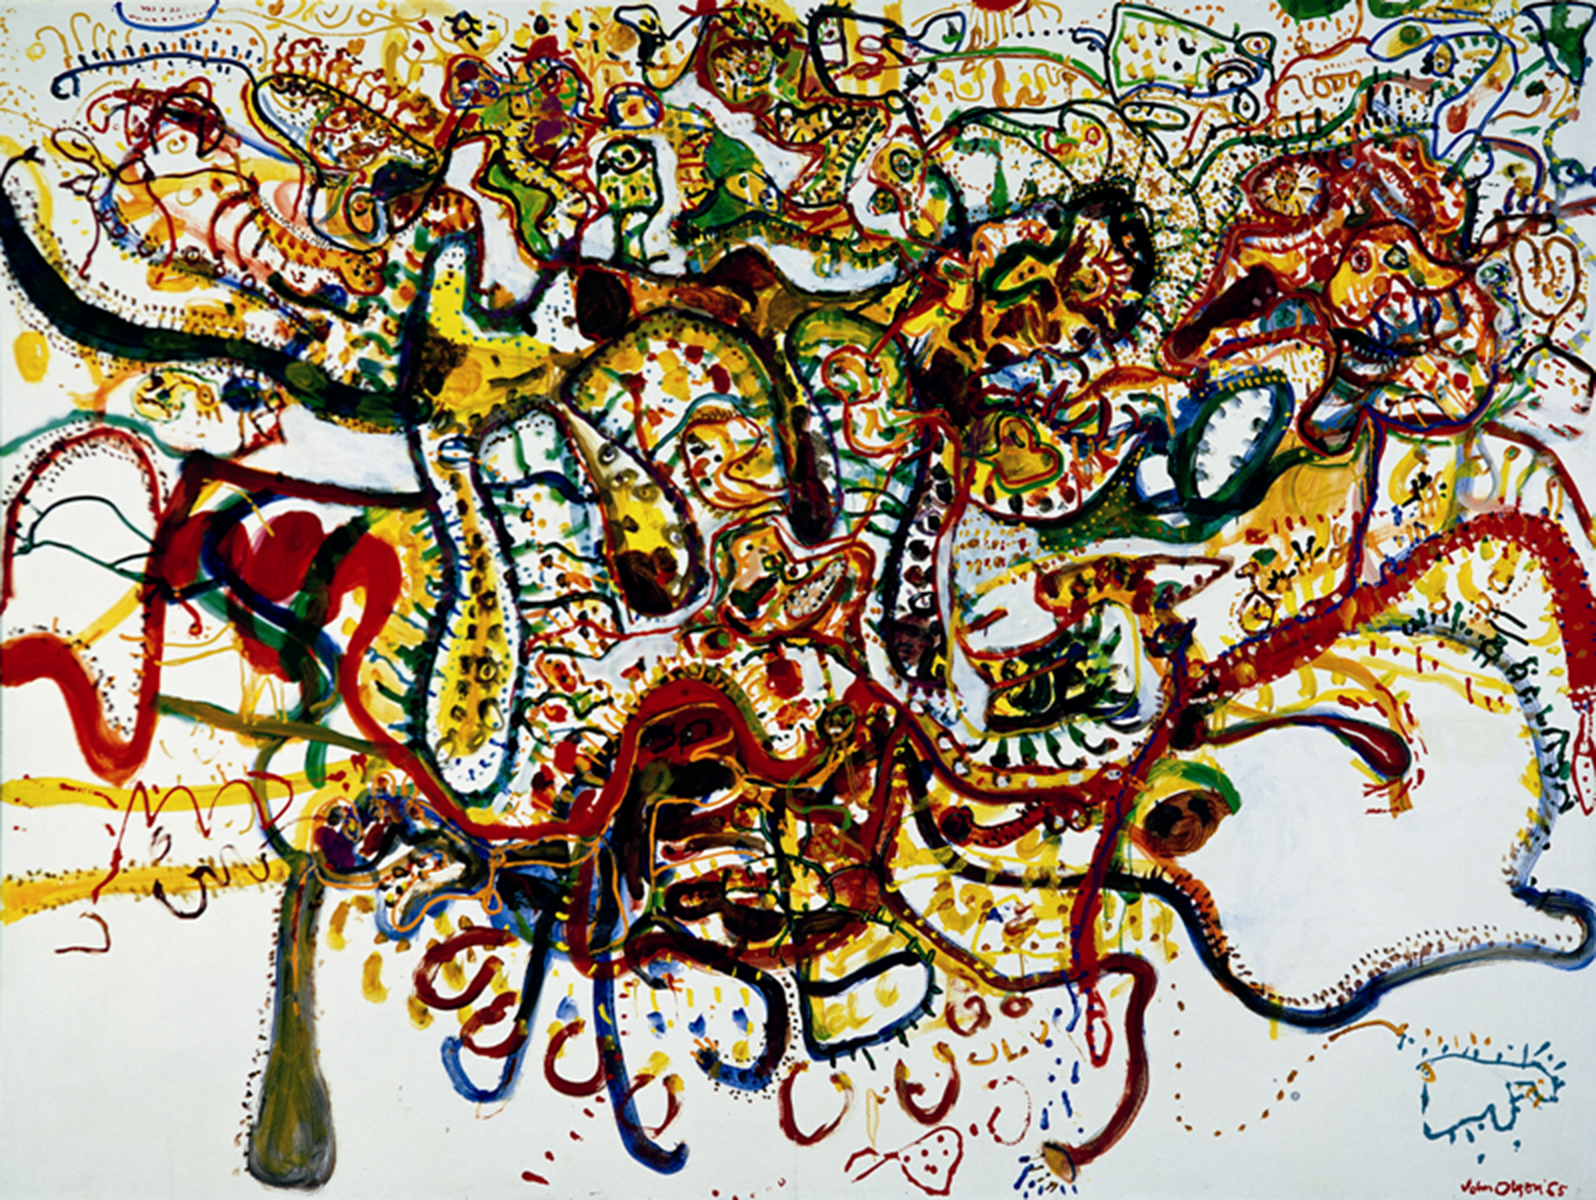 Painting by artist John Olsen of many swirling and intersecting lines in green, yellow, red and blue on a white background.